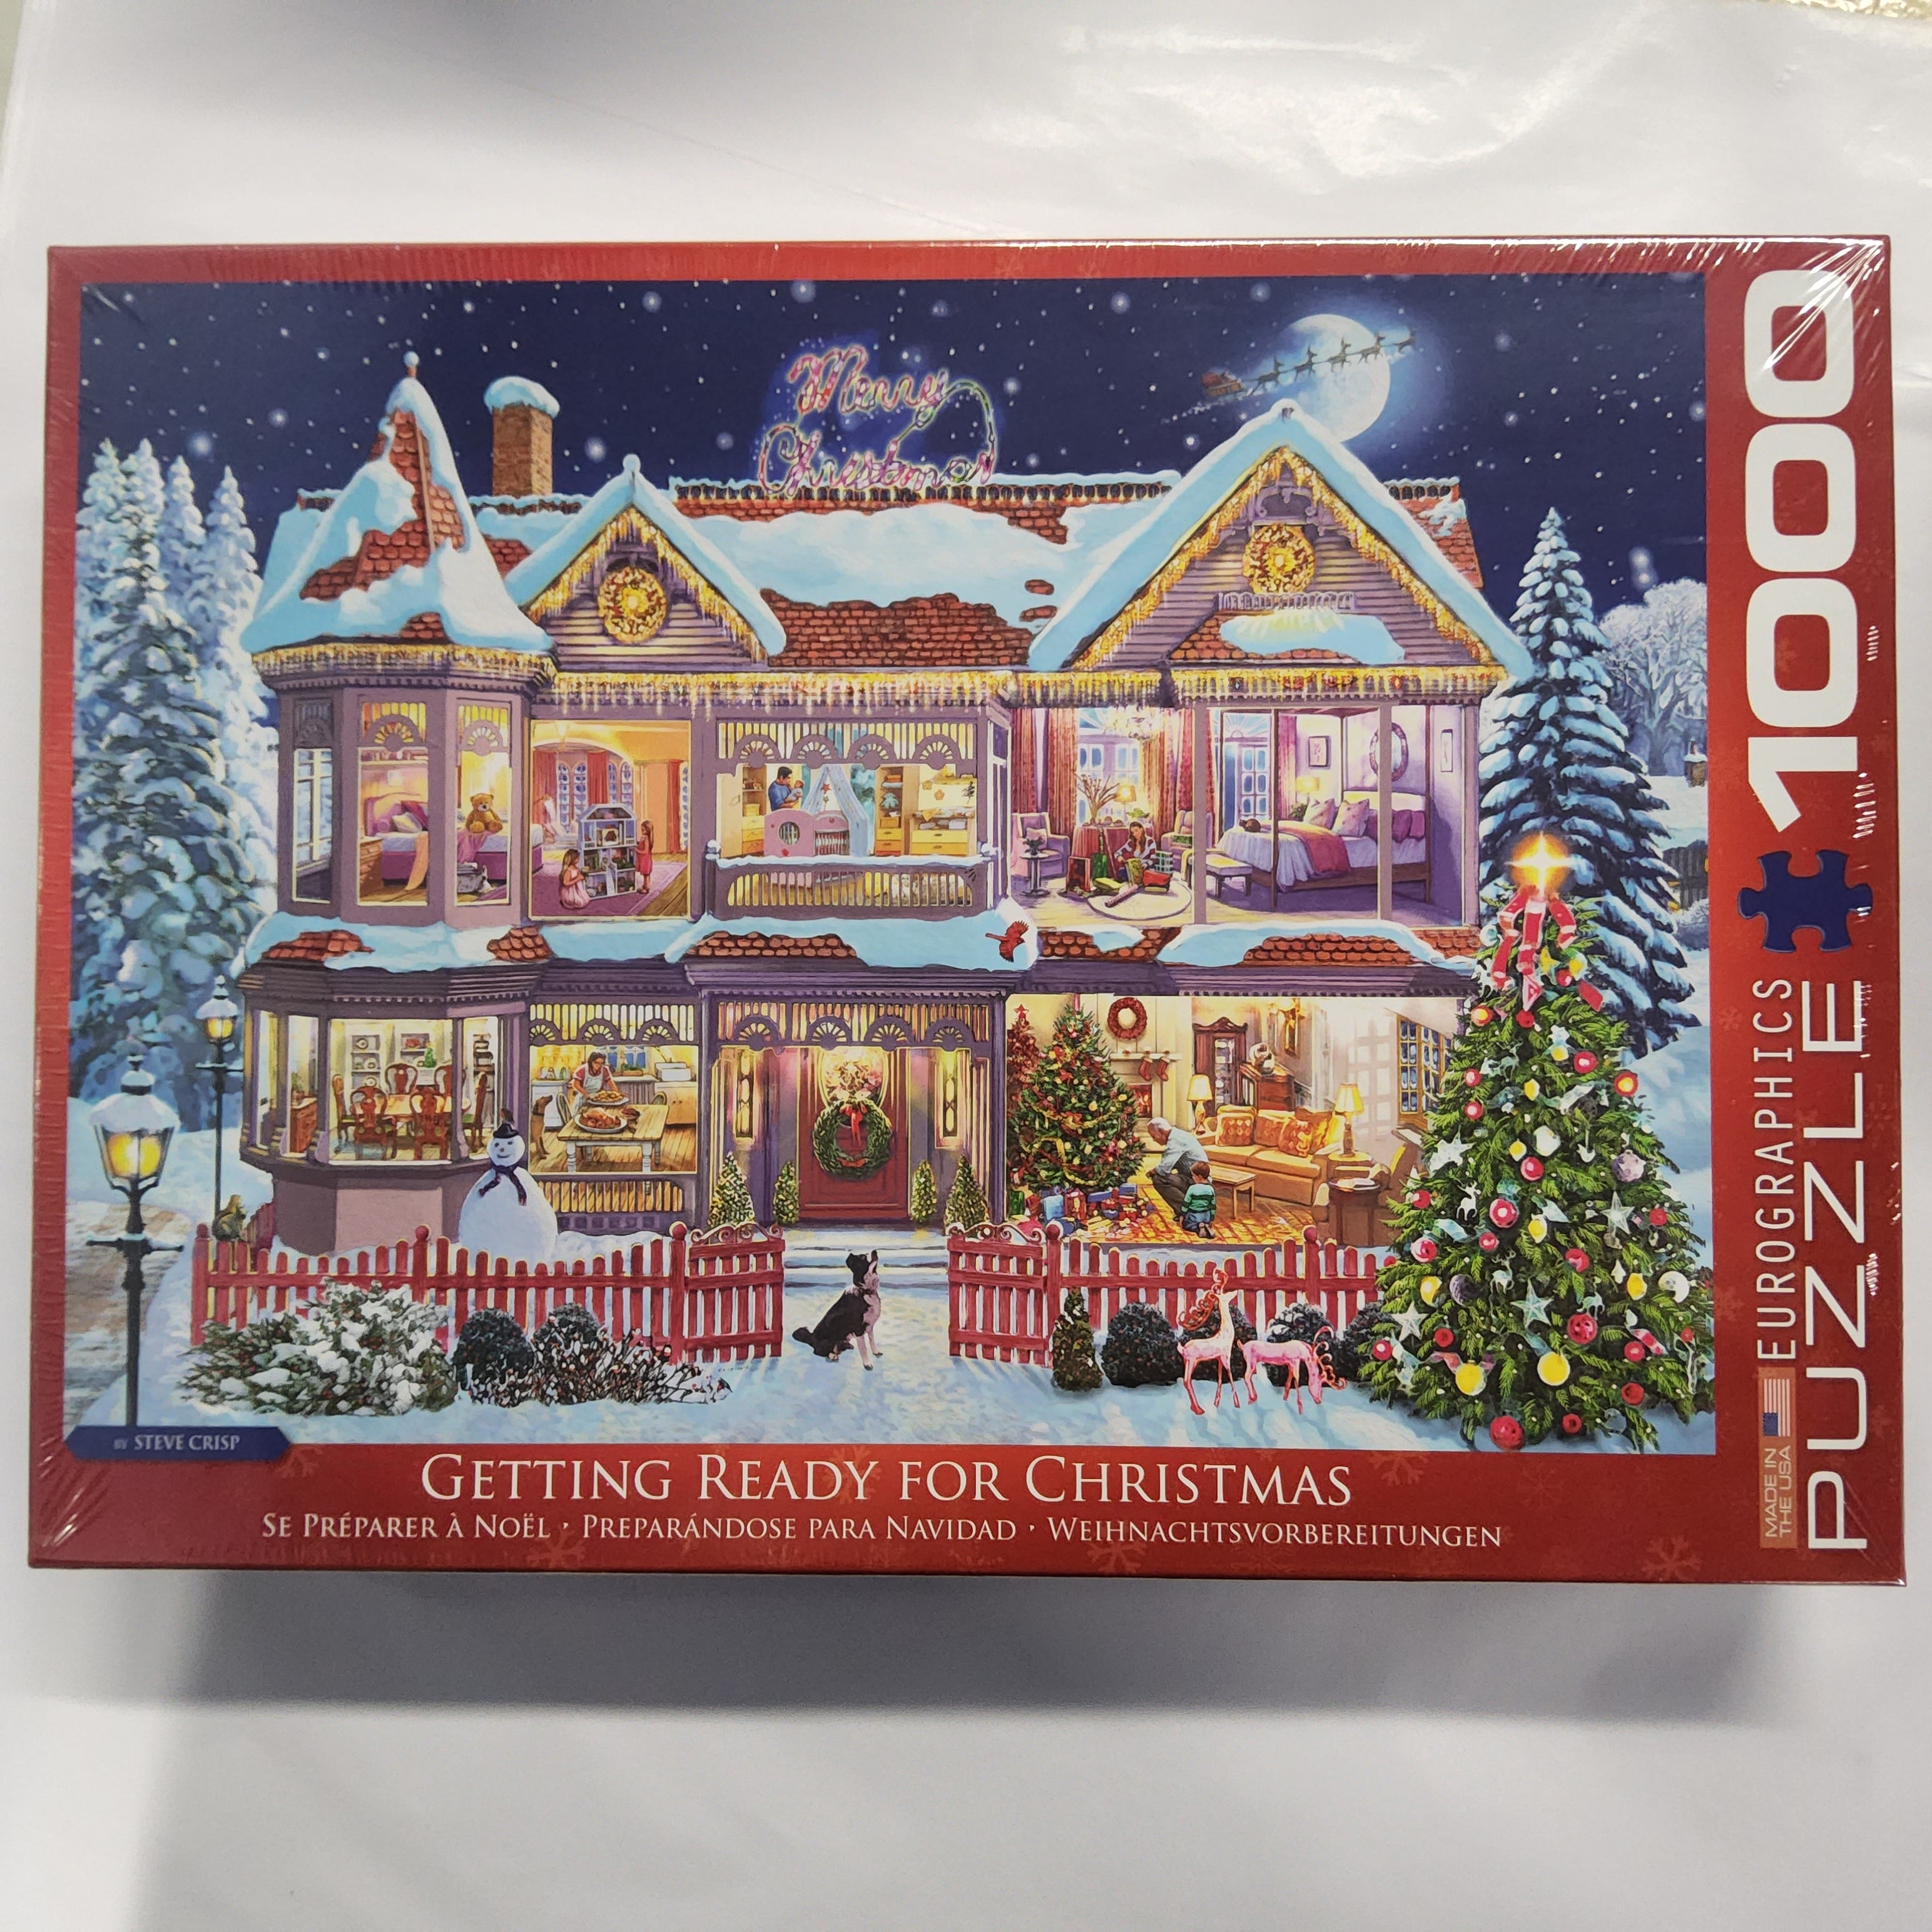 Eurographics Puzzle - Getting Ready for Christmas - 1000 pieces - 6000-0973